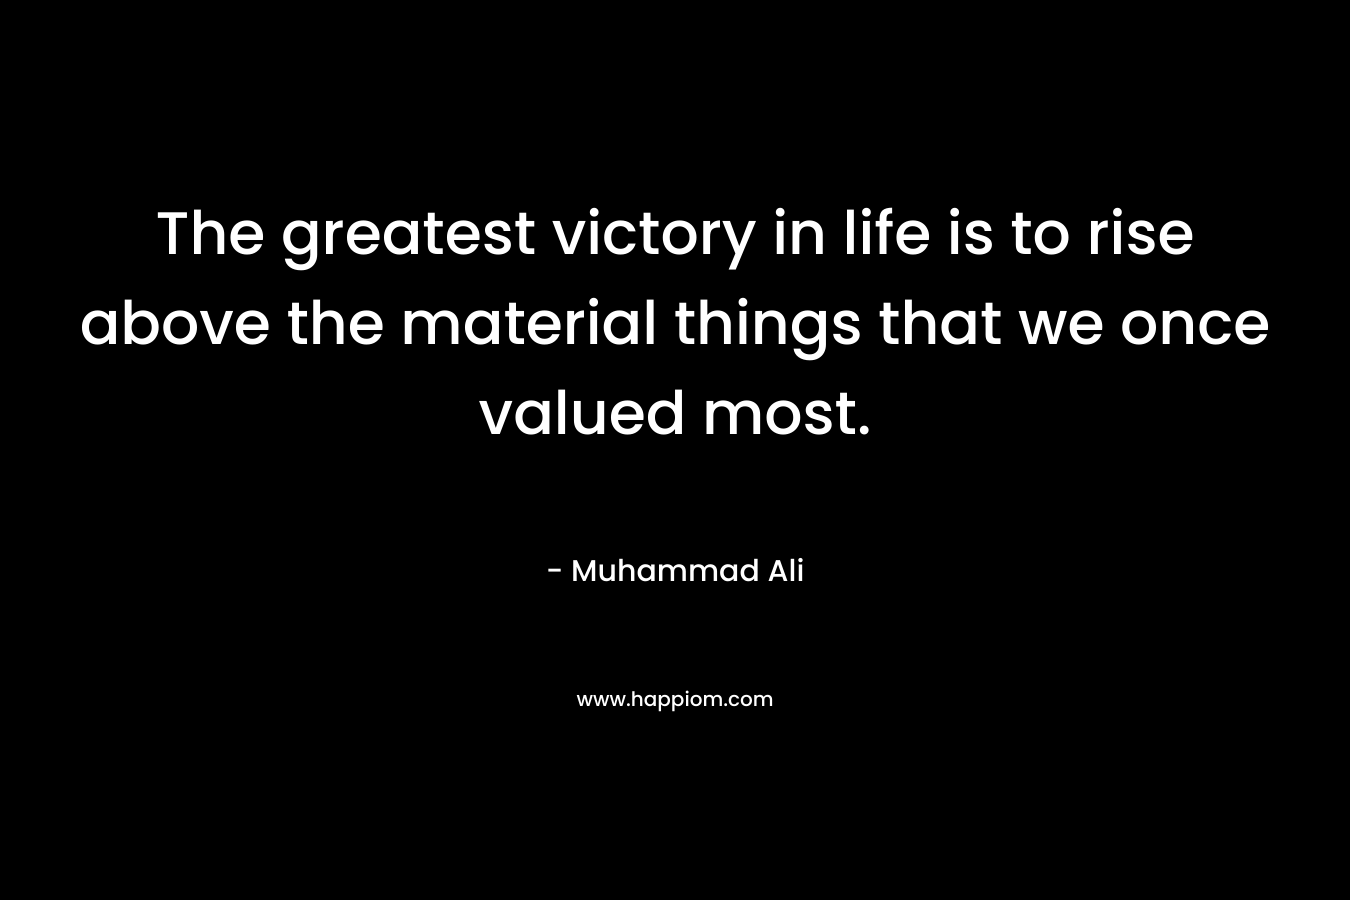 The greatest victory in life is to rise above the material things that we once valued most.